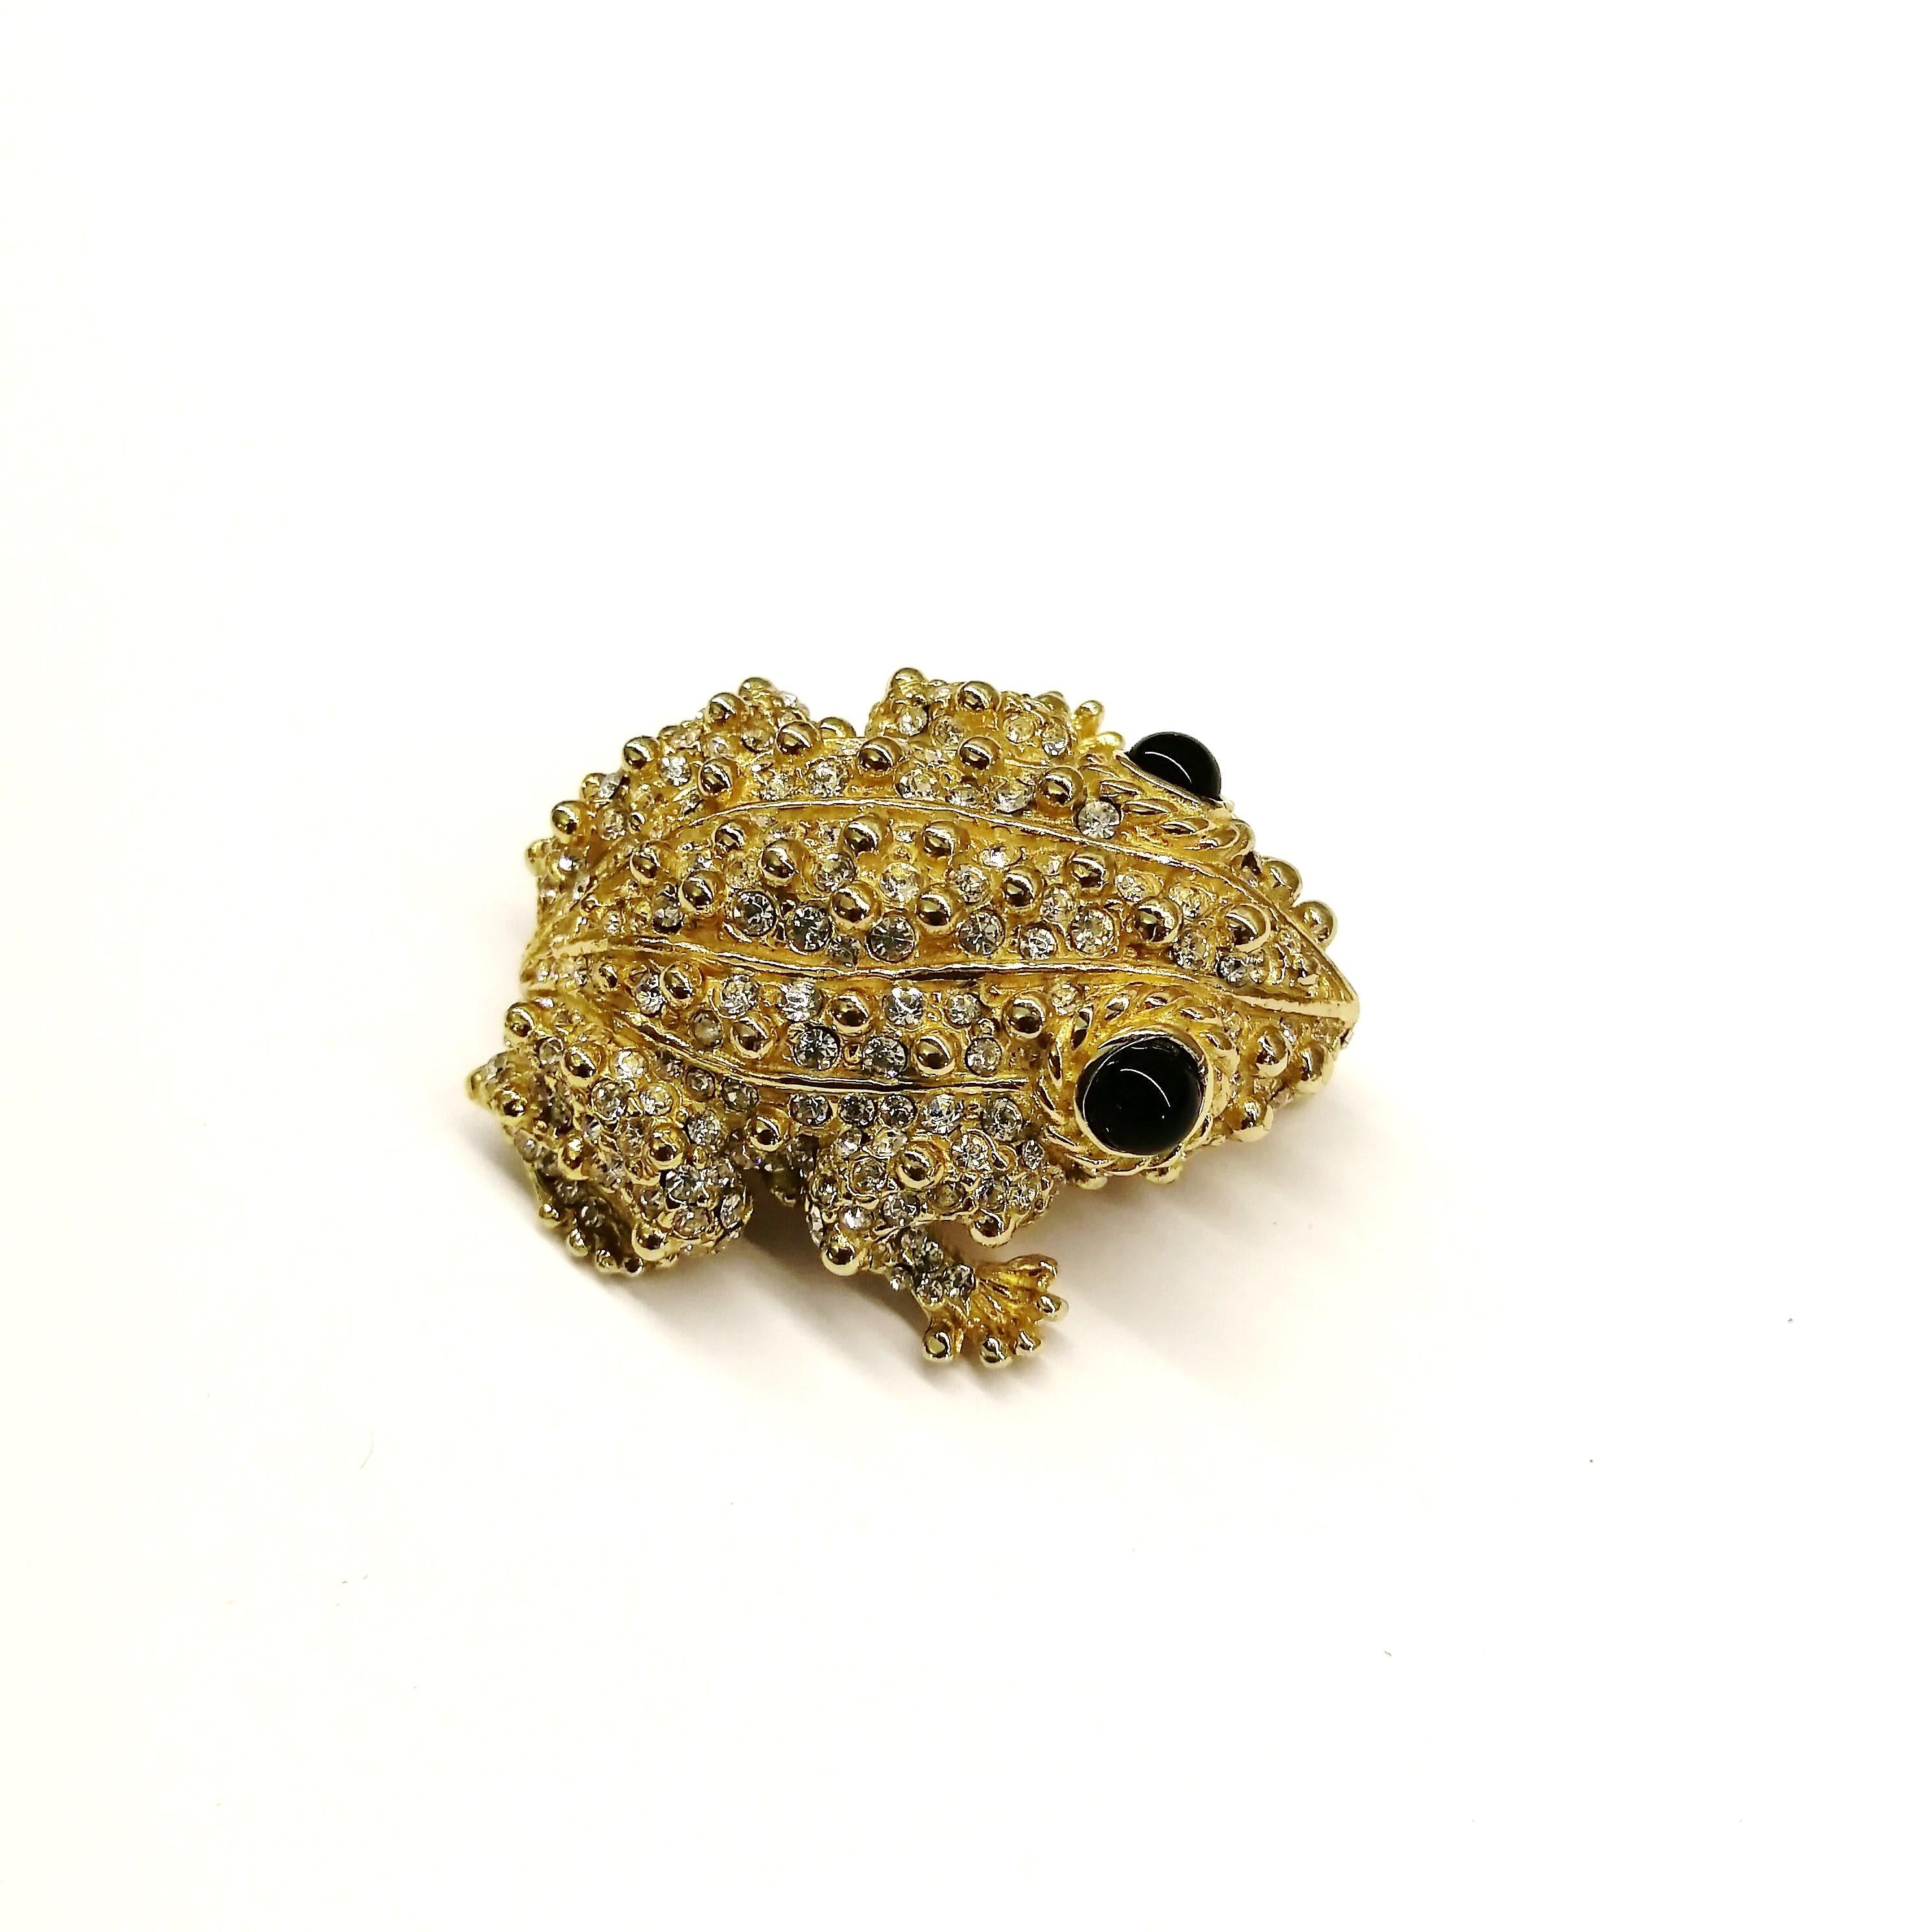 A charming gilt metal and clear paste 'frog' or 'toad' brooch, made by Ciner, the quality as expected from this well known designer. The surface has gilt 'bobbles' interspersed amongst the clear pastes, giving a shimmering and textured surface.
Sits